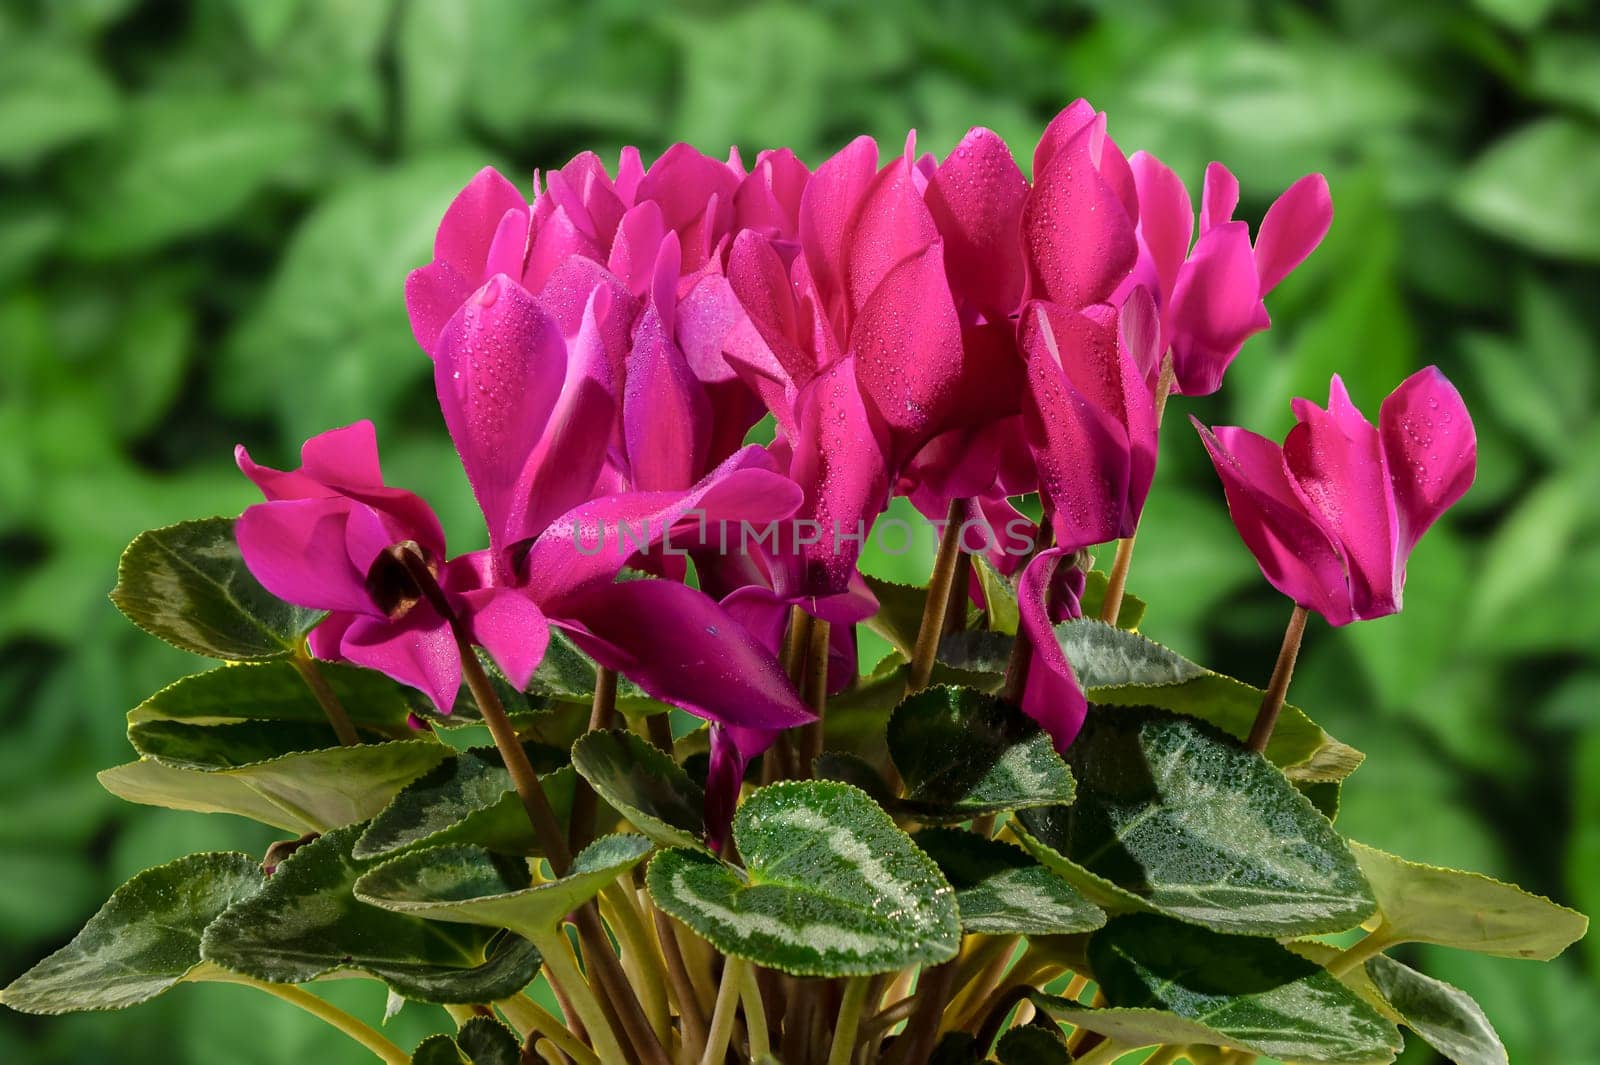 Blossoming red cyclamen persicum flowers. Close-up on a green leaves background